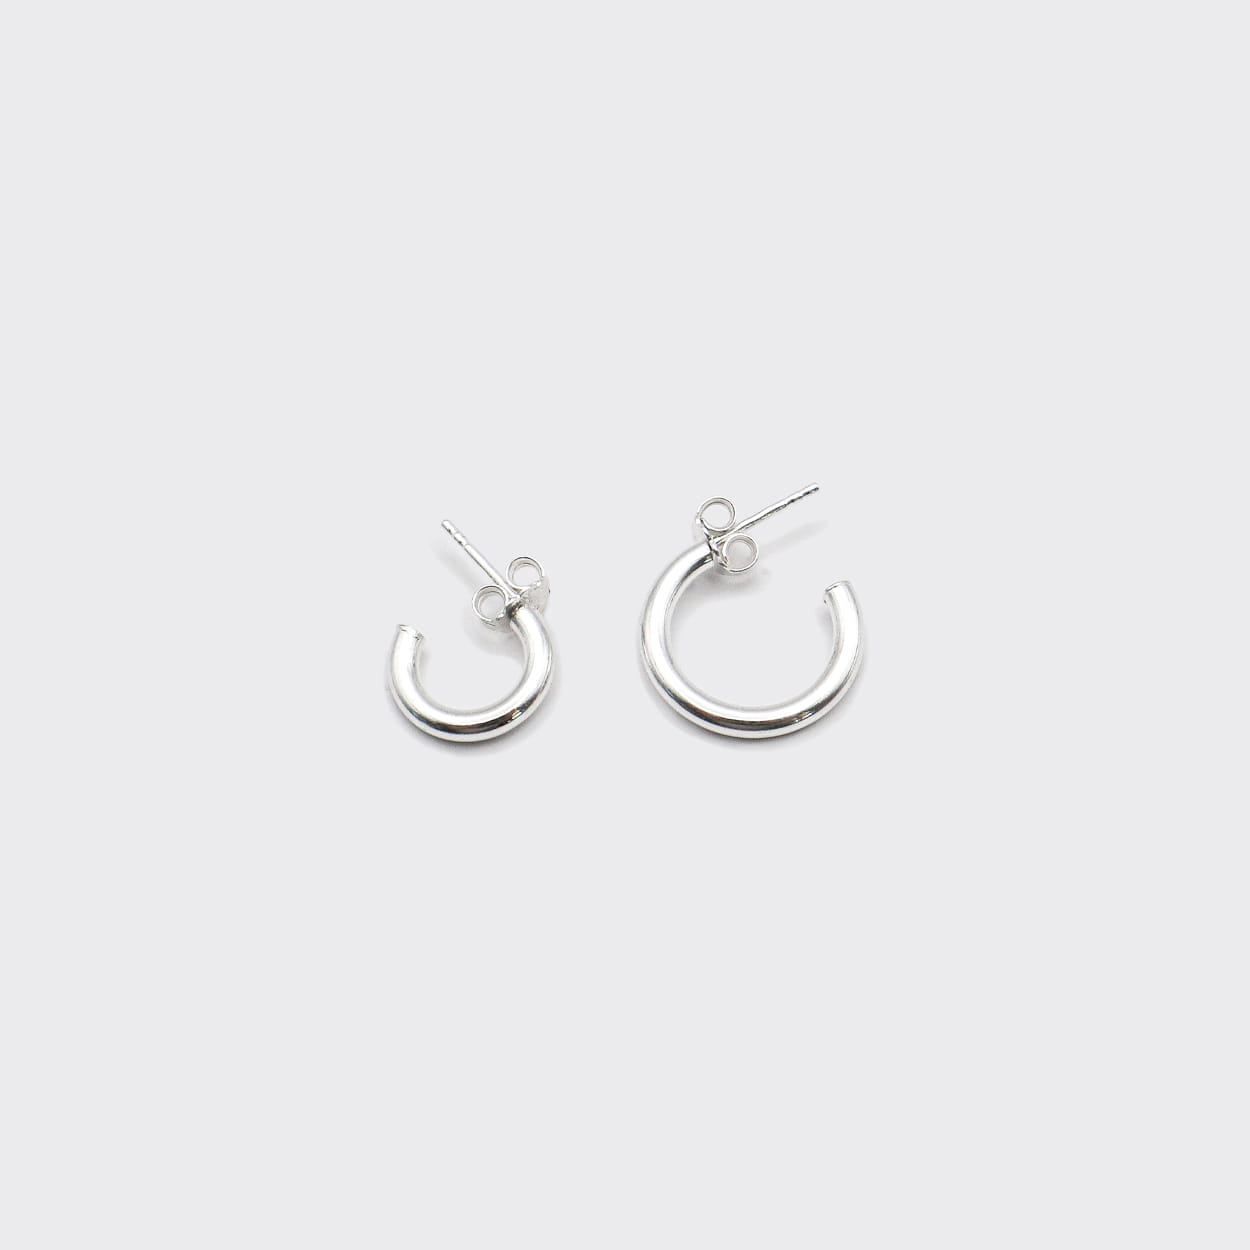 The Hoop 23 is a unisex, timeless and elegant earring designed by Atelier Domingo's. It is crafted in Italy and made of solid 925 Sterling silver. It is a tribute to the famous number 23 of the Chicago Bulls. It is made to be worn every day, by men and women.